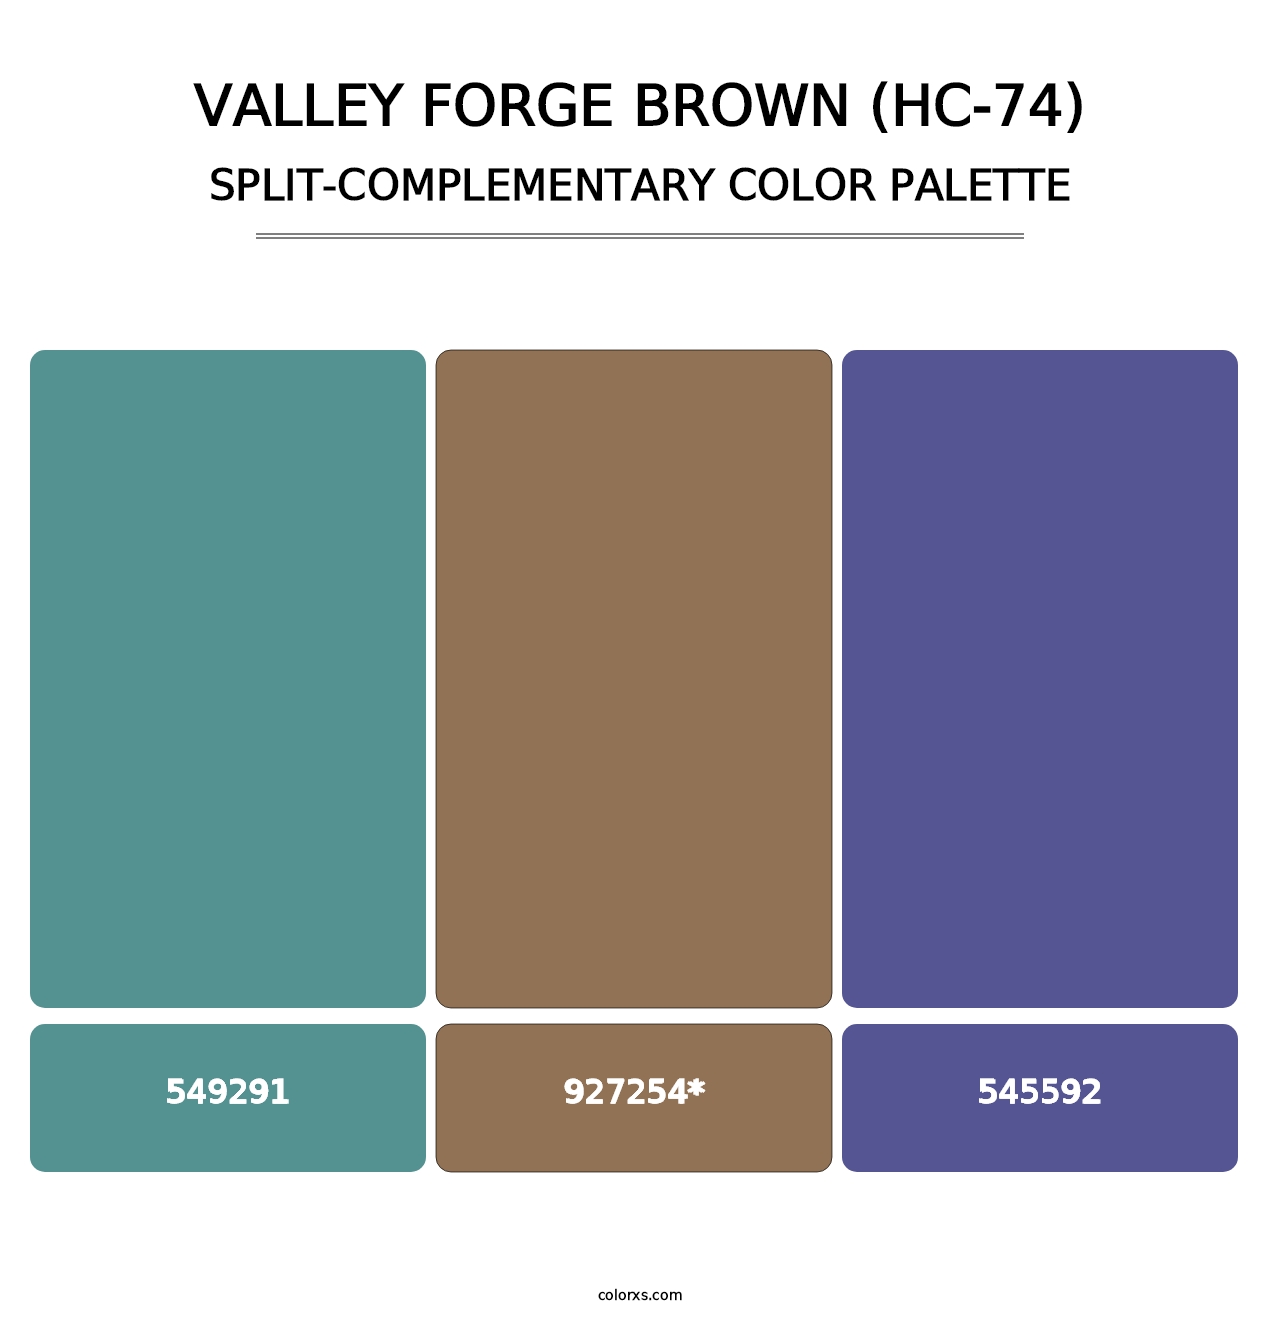 Valley Forge Brown (HC-74) - Split-Complementary Color Palette